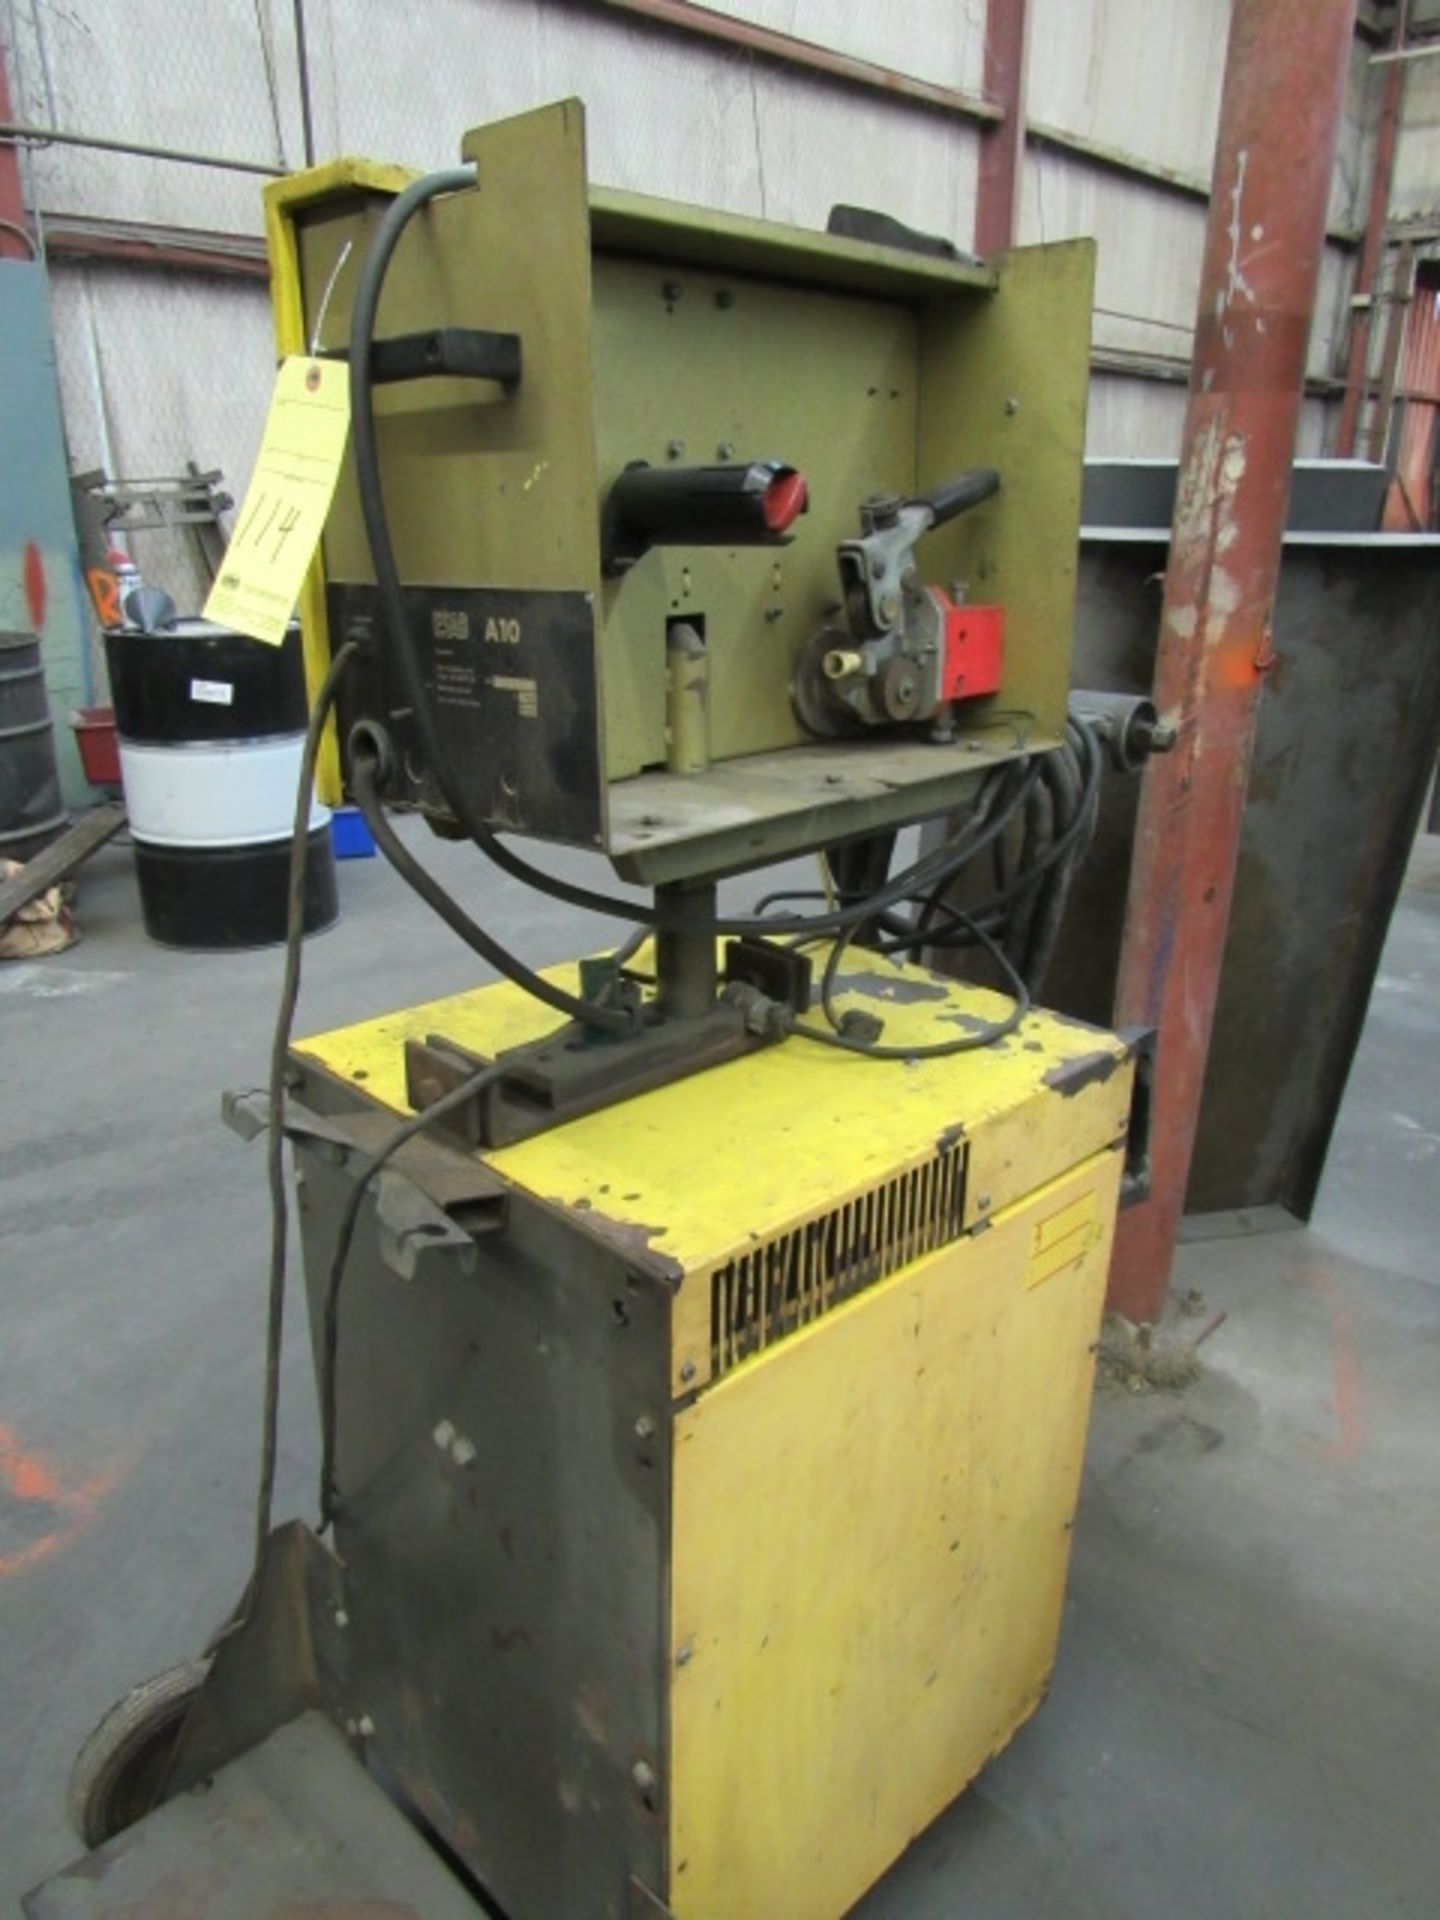 WIRE FEEDER, ESAB A/O MDL. A10-MVC30, 400 amps welding current, 60% max. duty factor, S/N 331-403- - Image 2 of 4